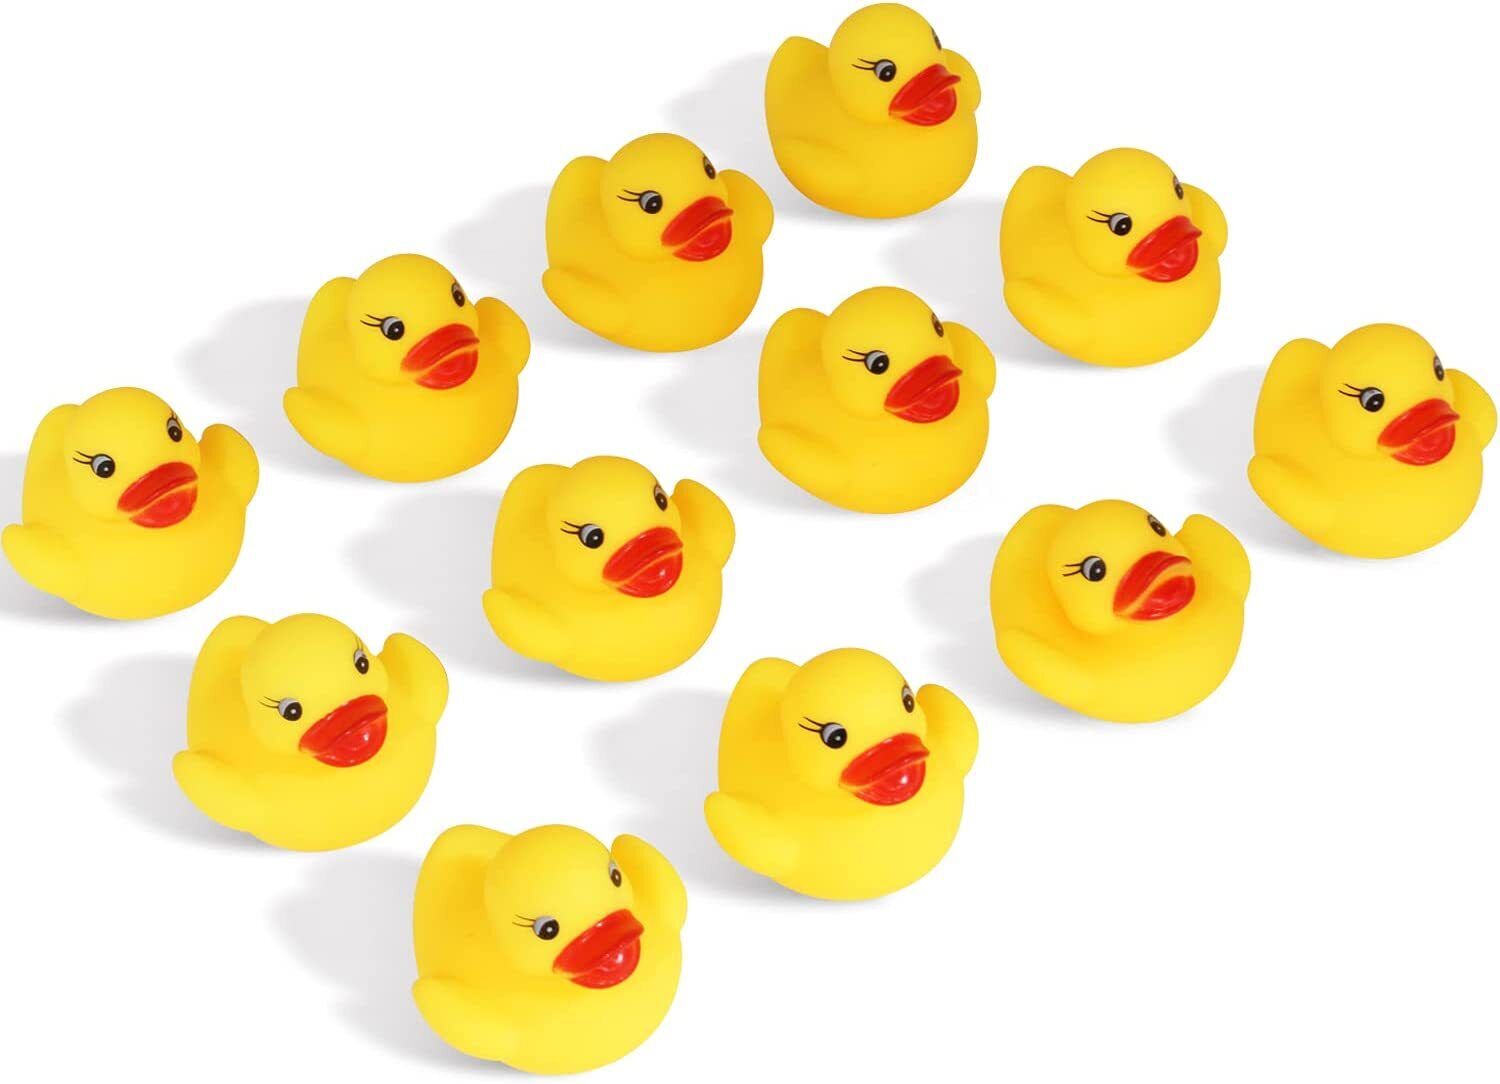 Novelty Place 12-48 Pcs Float Rubber Duck Ducky Baby Bath Toy for Kids Novelty Place Does Not Apply